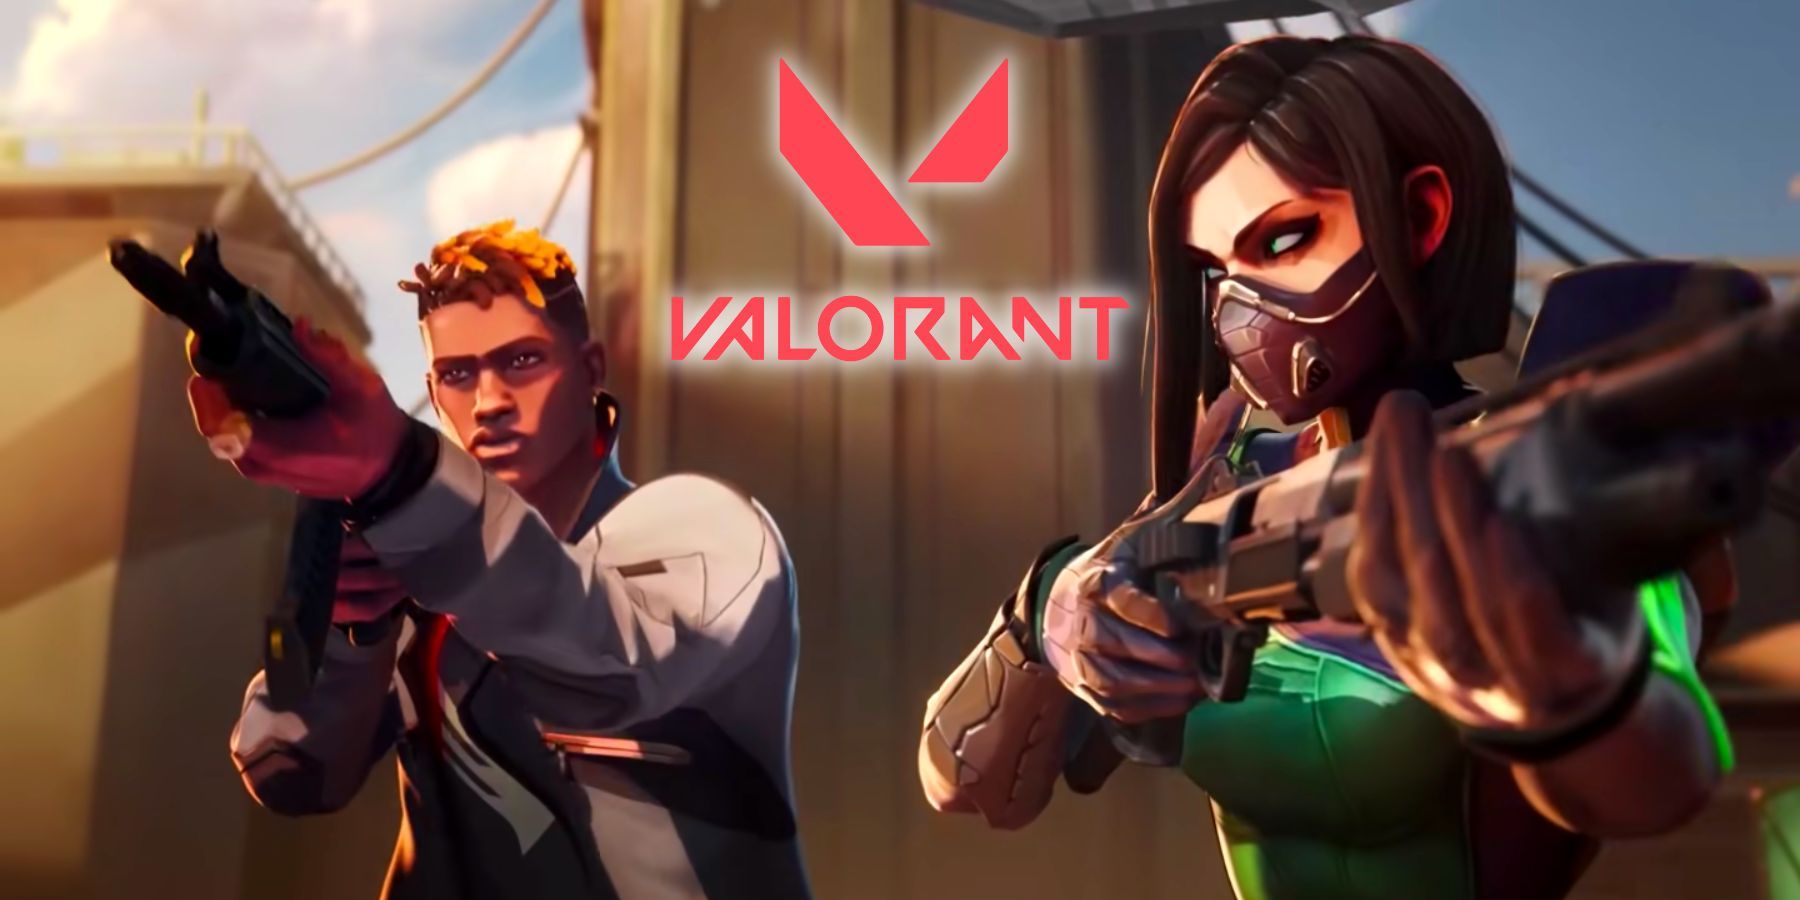 Emboldened by 'Arcane' Success, Riot Reportedly Releasing Valorant Movie in  Same Year as Avengers 5's Original Release Slate - FandomWire